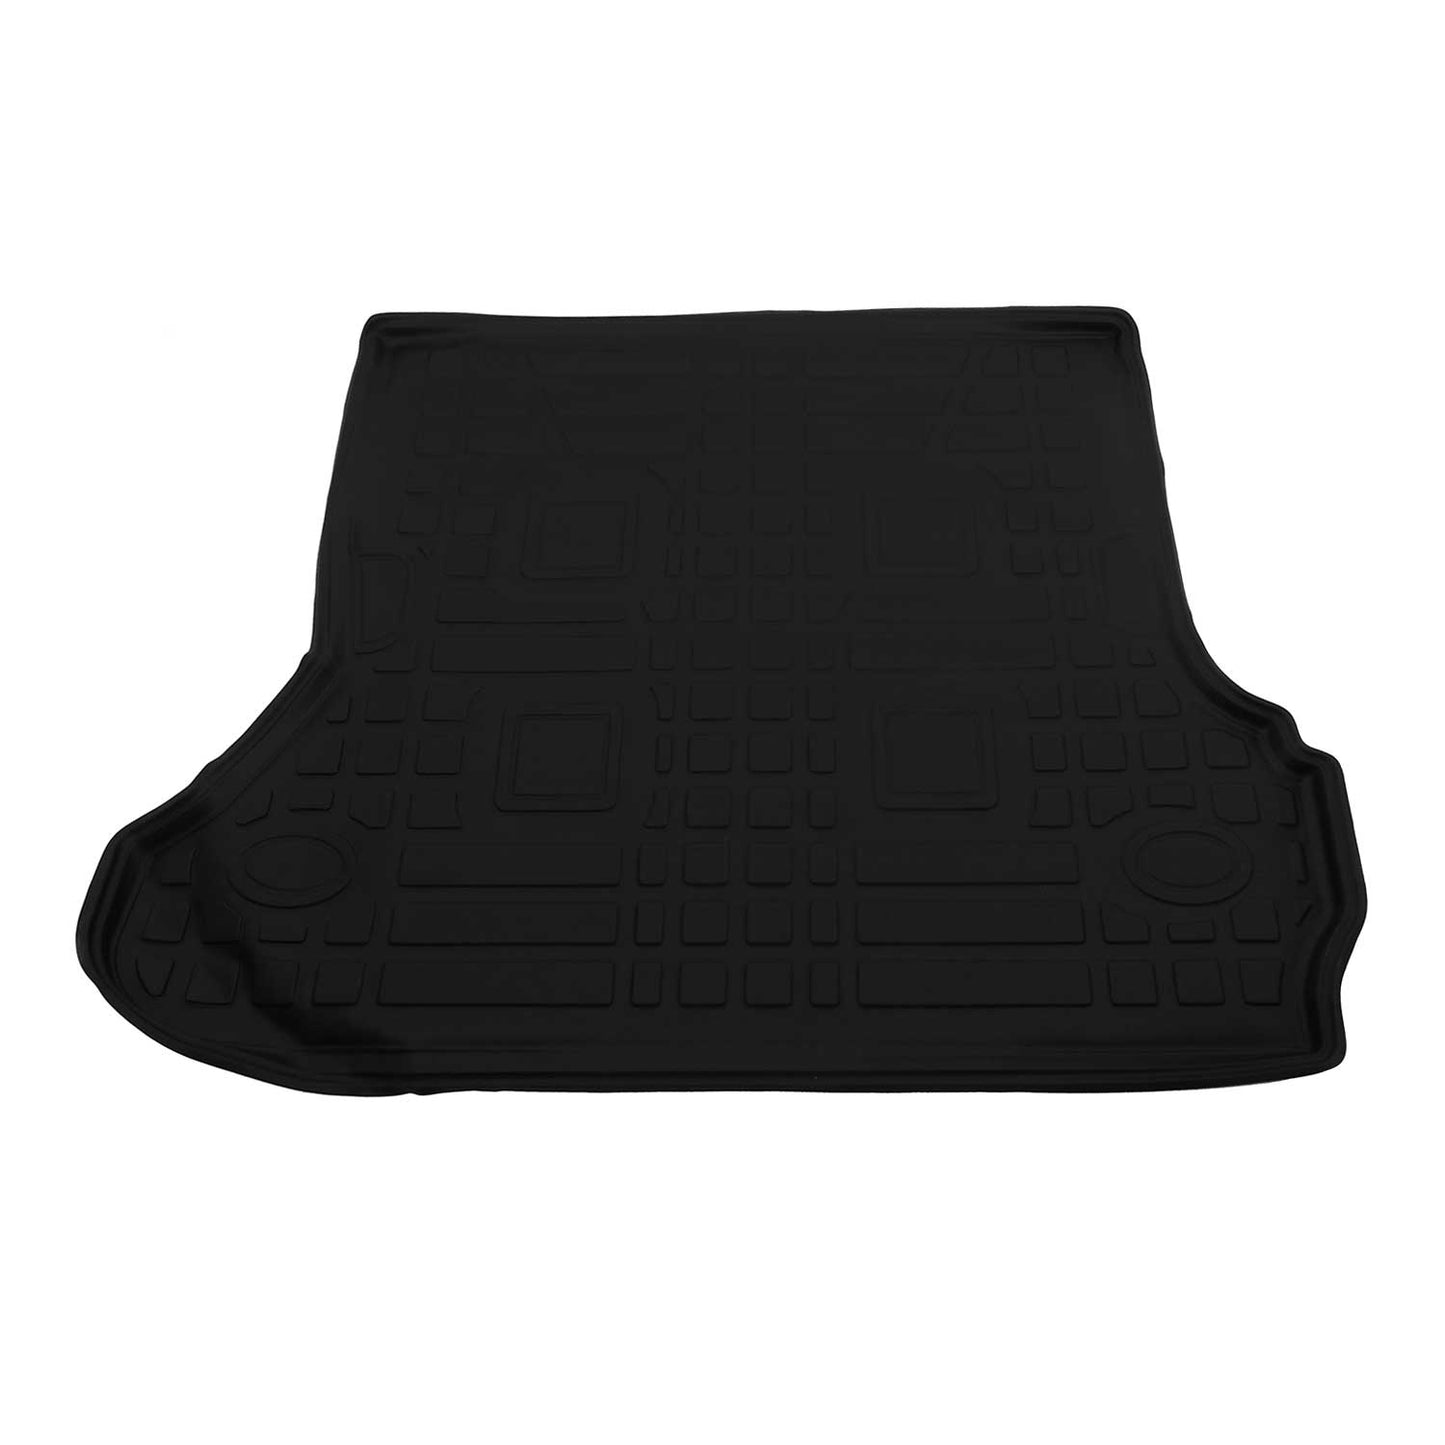 OMAC OMAC Cargo Mats Liner for Toyota Land Cruiser 100 1998-2007 All-Weather TPE 7042YPS250